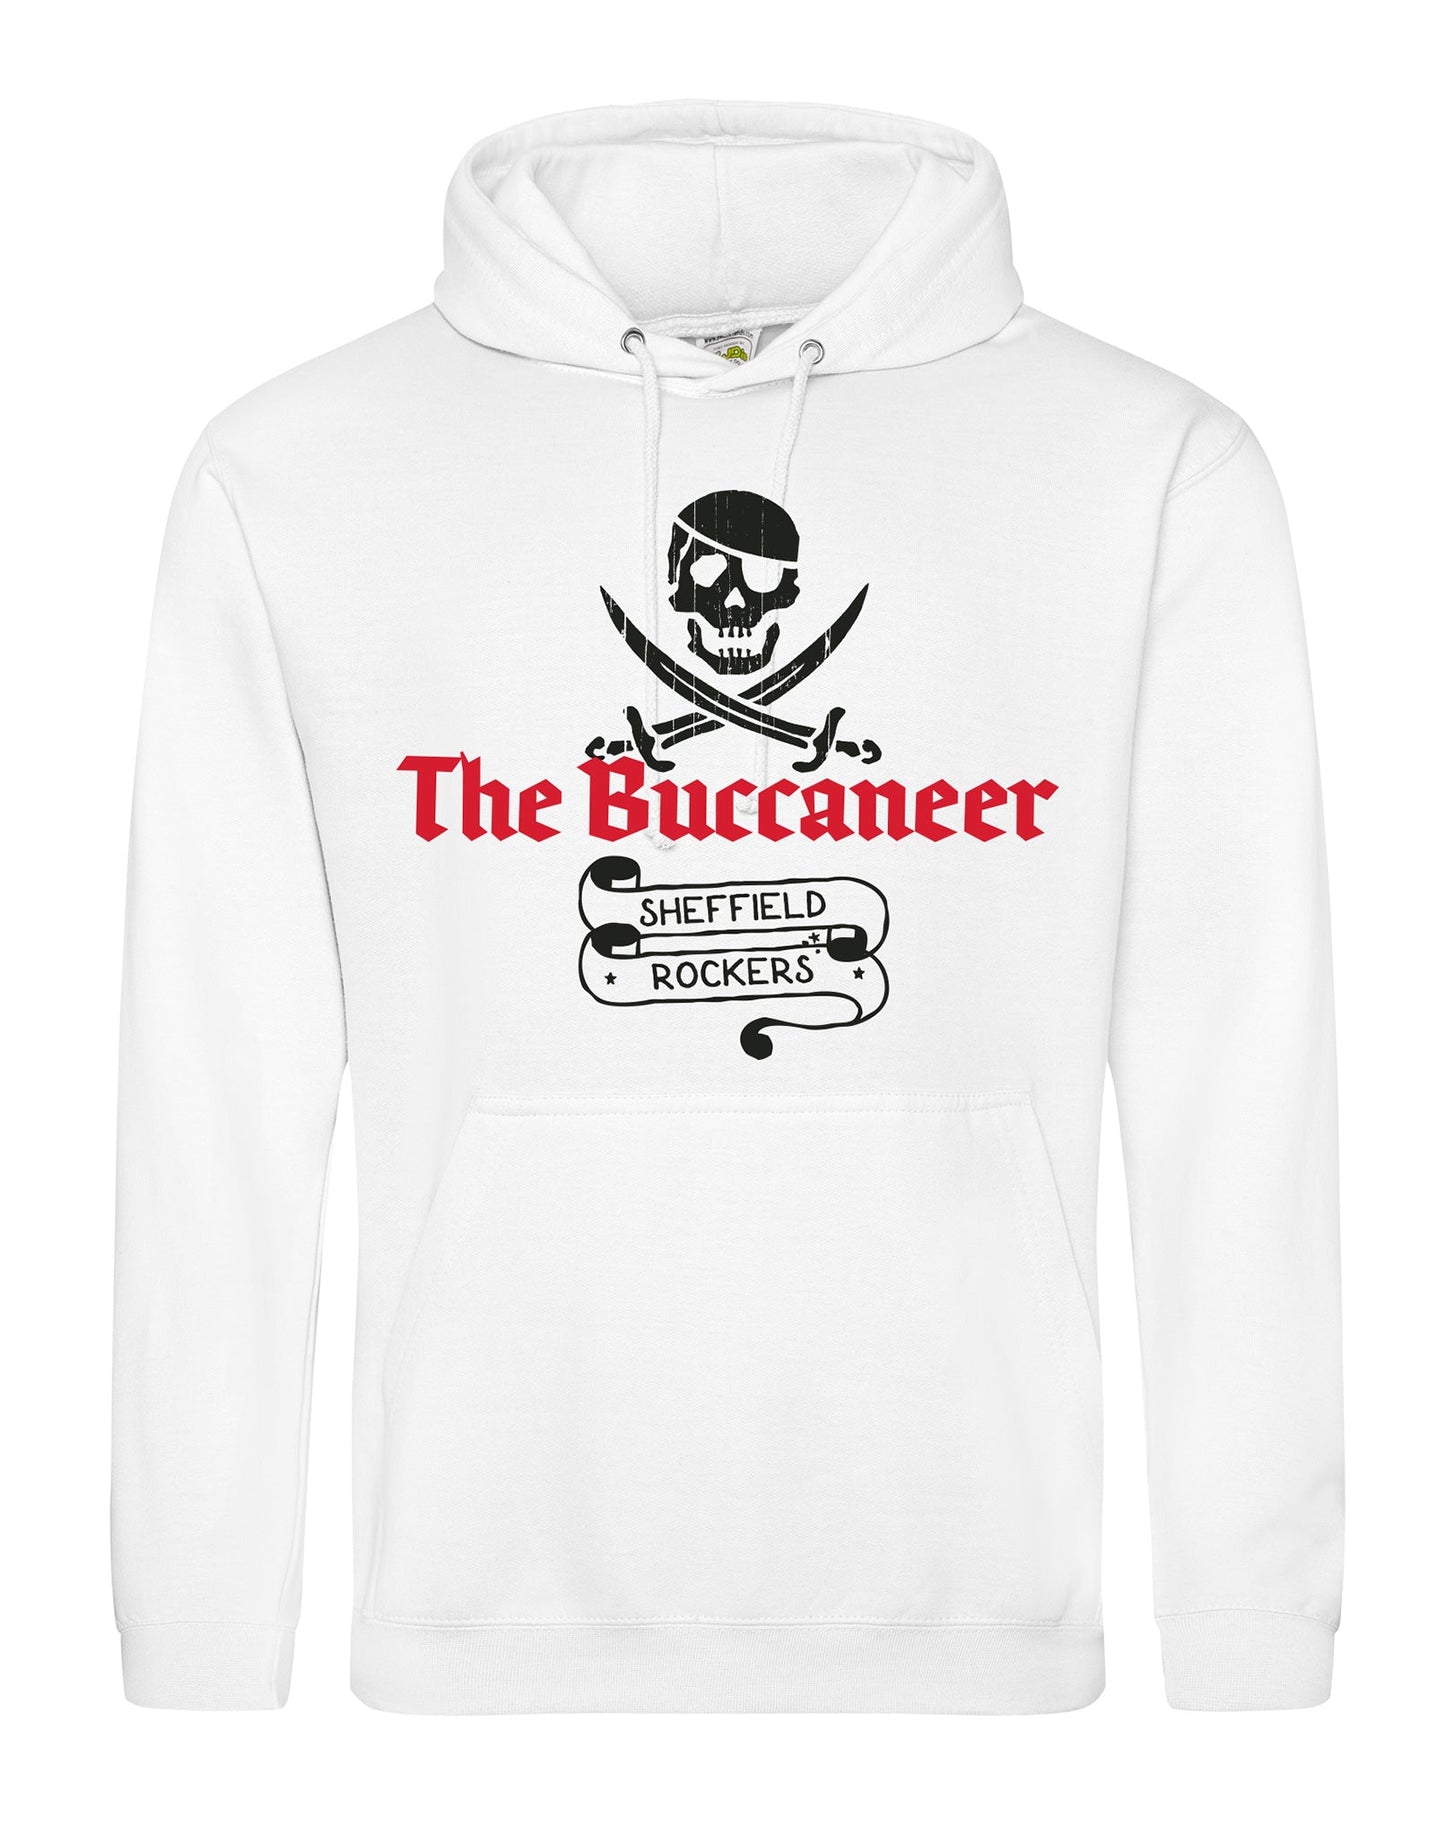 Buccaneer unisex fit hoodie - various colours - Dirty Stop Outs